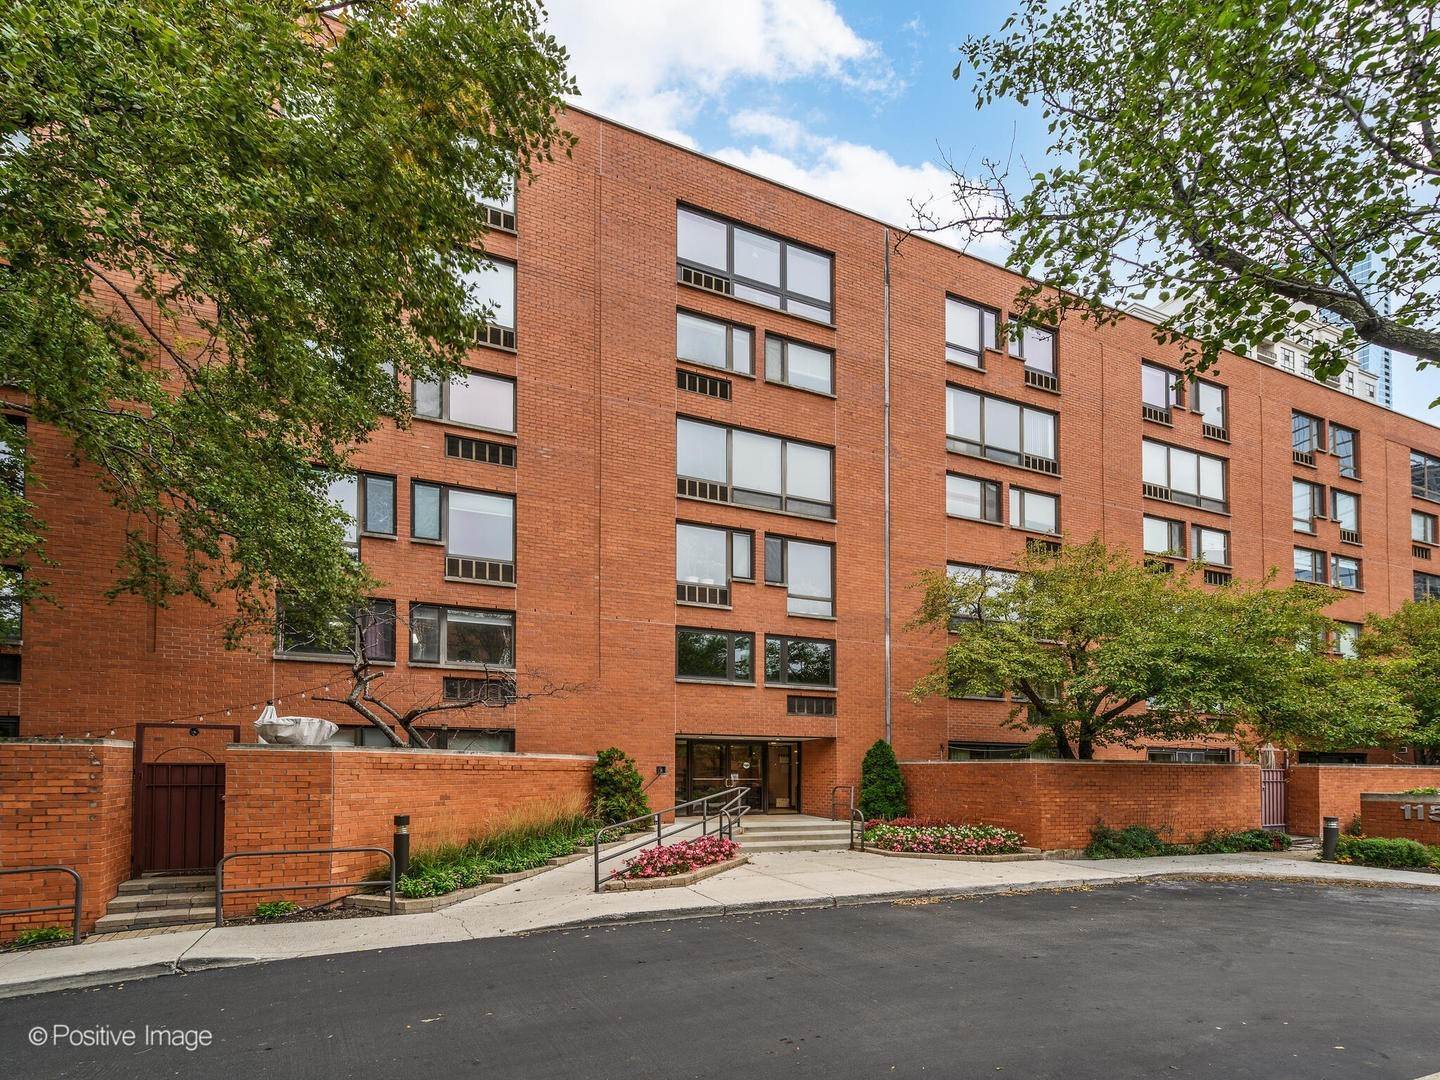 1. Single Family for Sale at Dearborn Park, Chicago, IL 60605